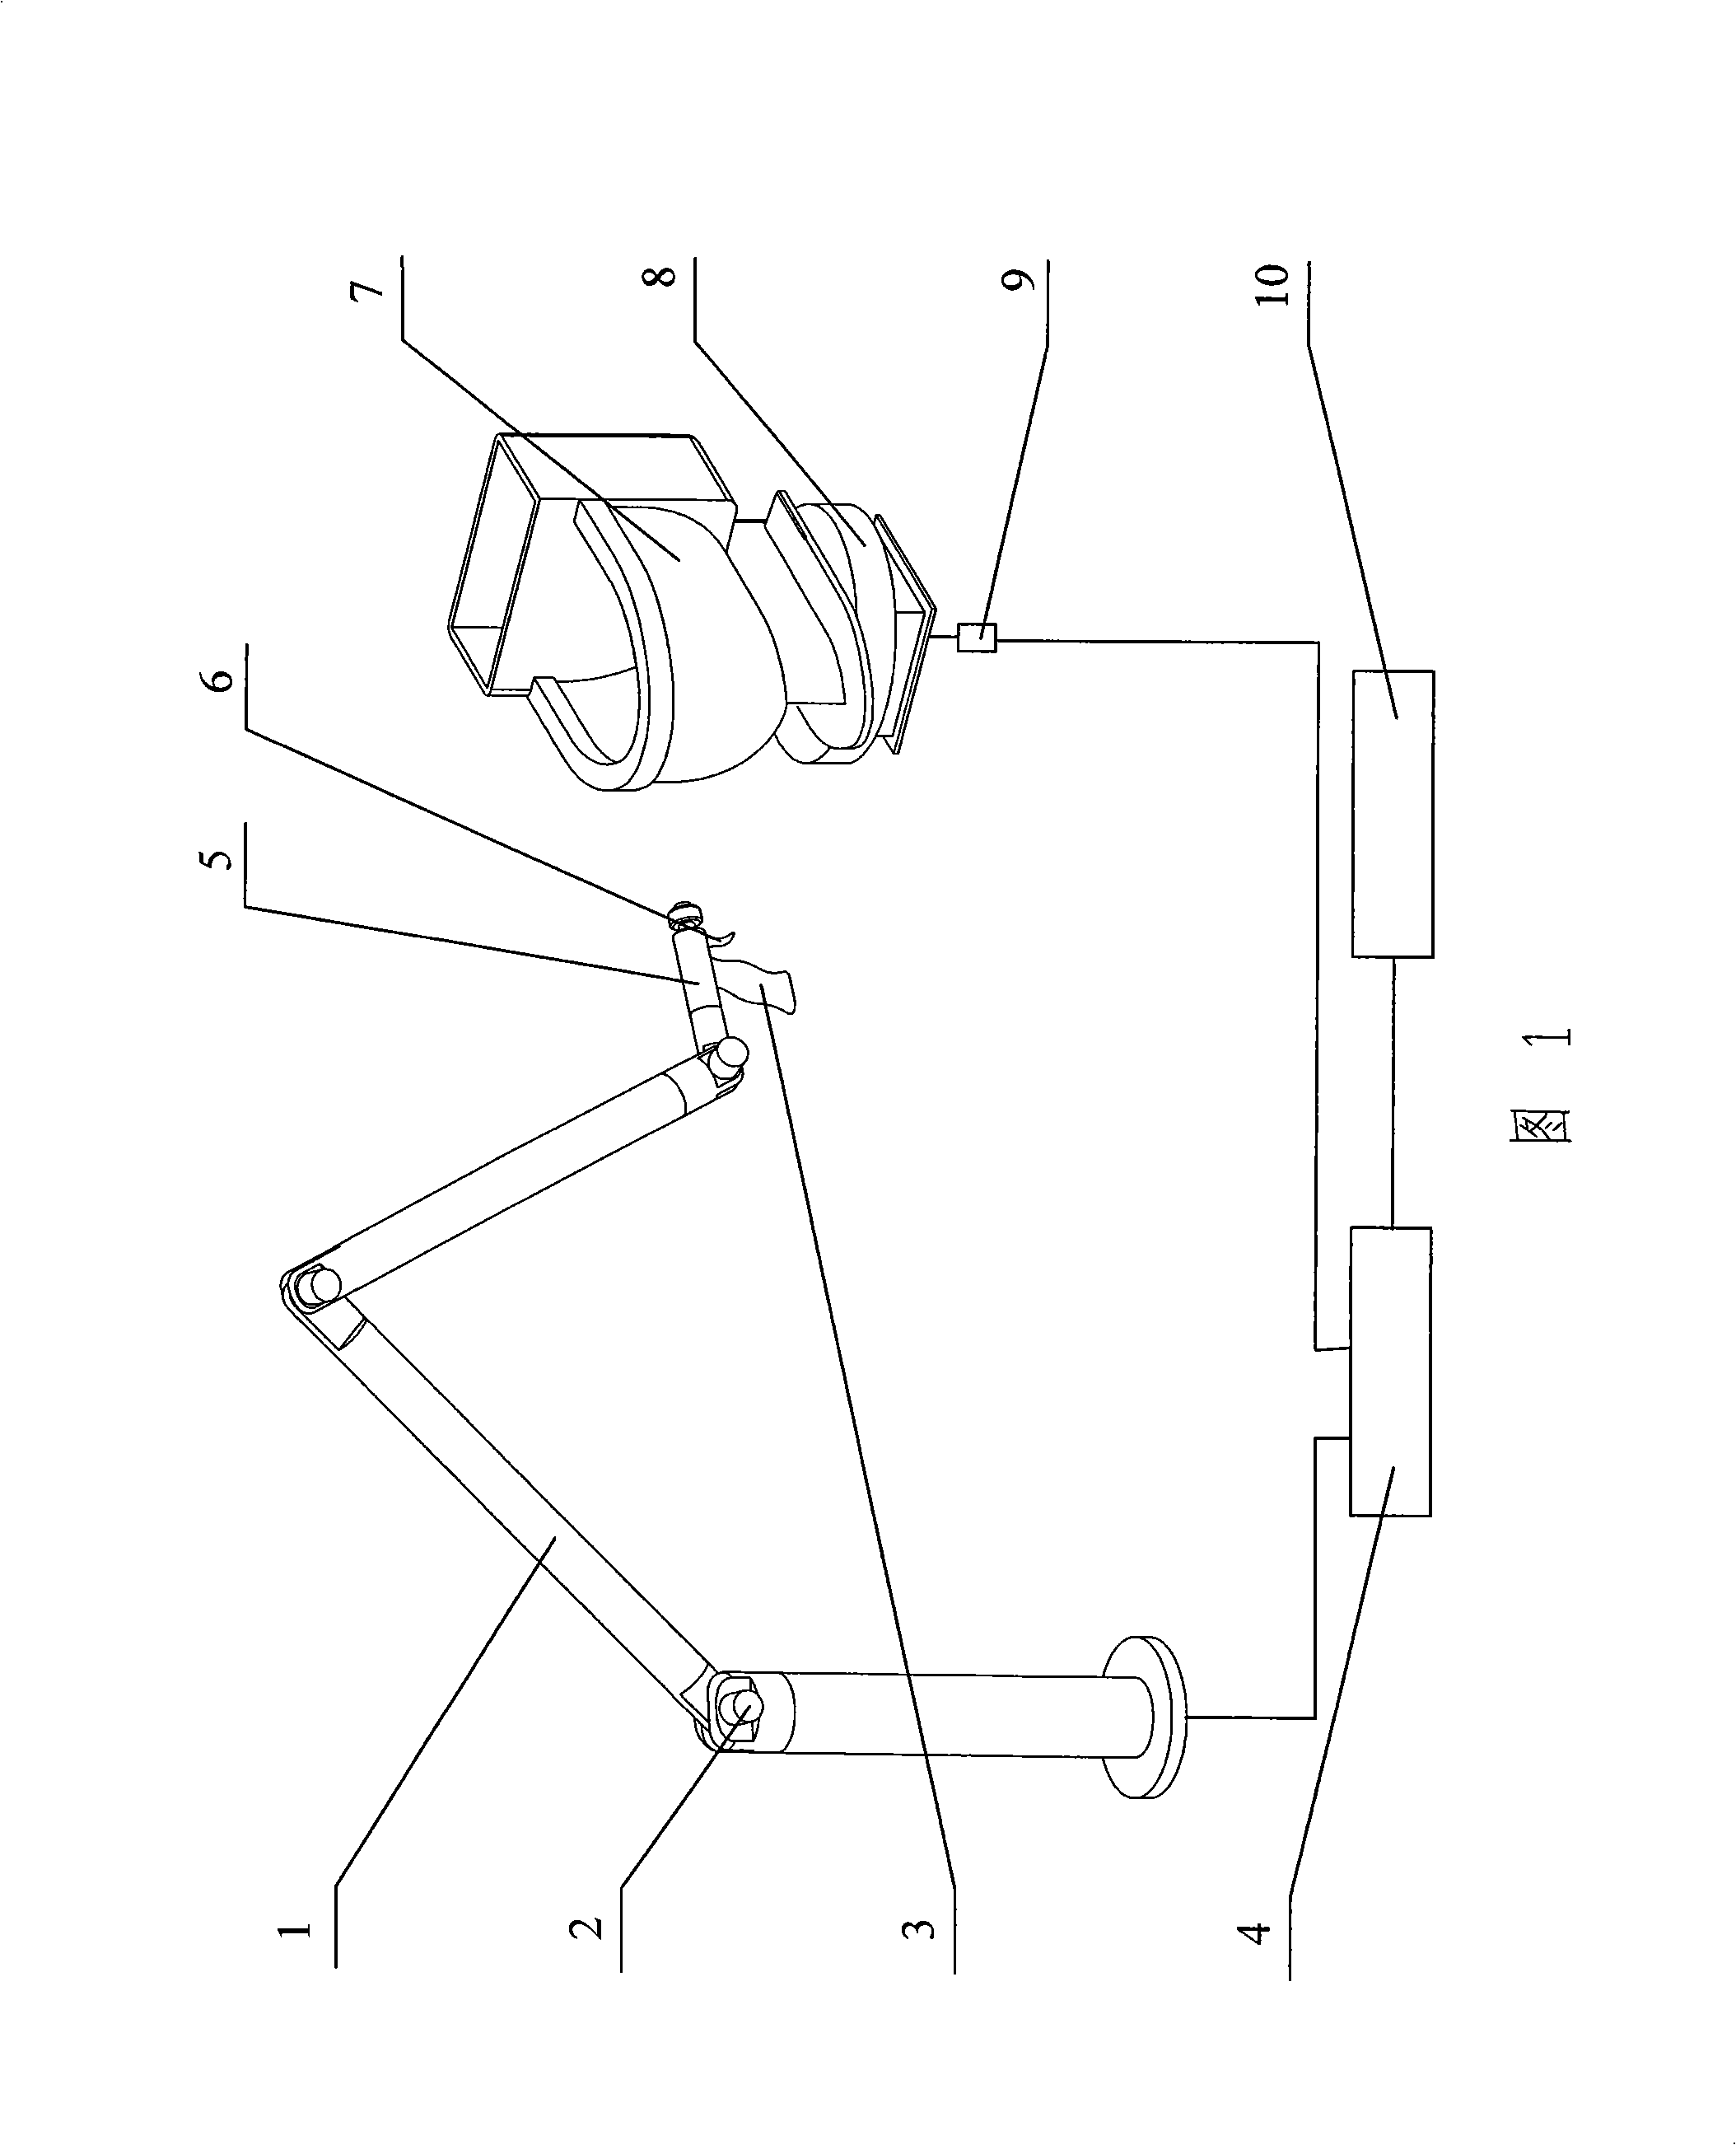 Glazing robot off-line teaching device and teaching method